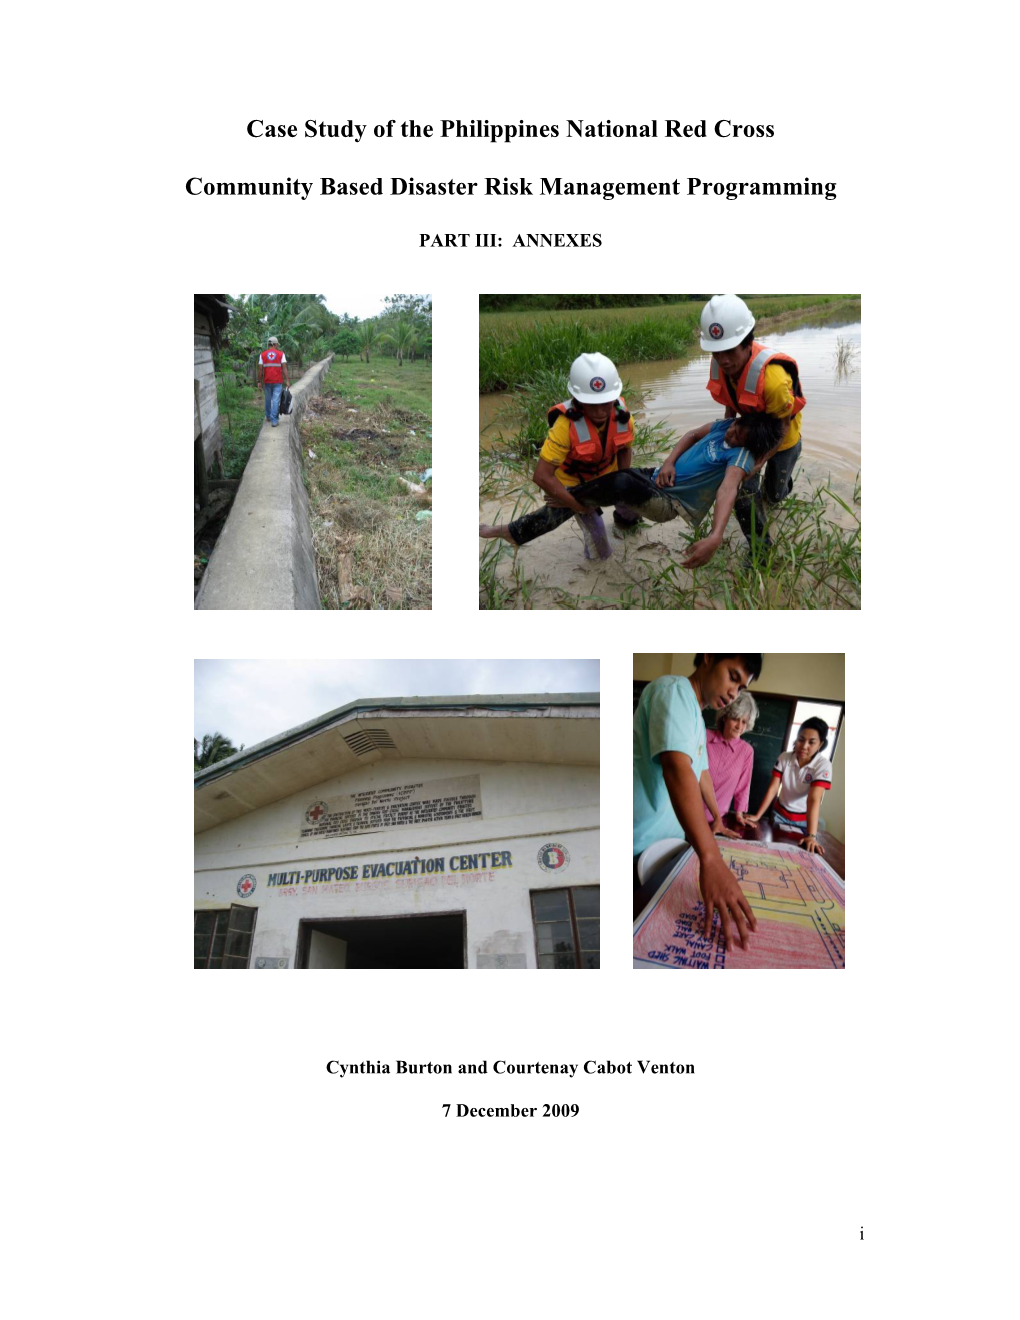 Case Study of the Philippines National Red Cross Community Based Disaster Risk Management Programming